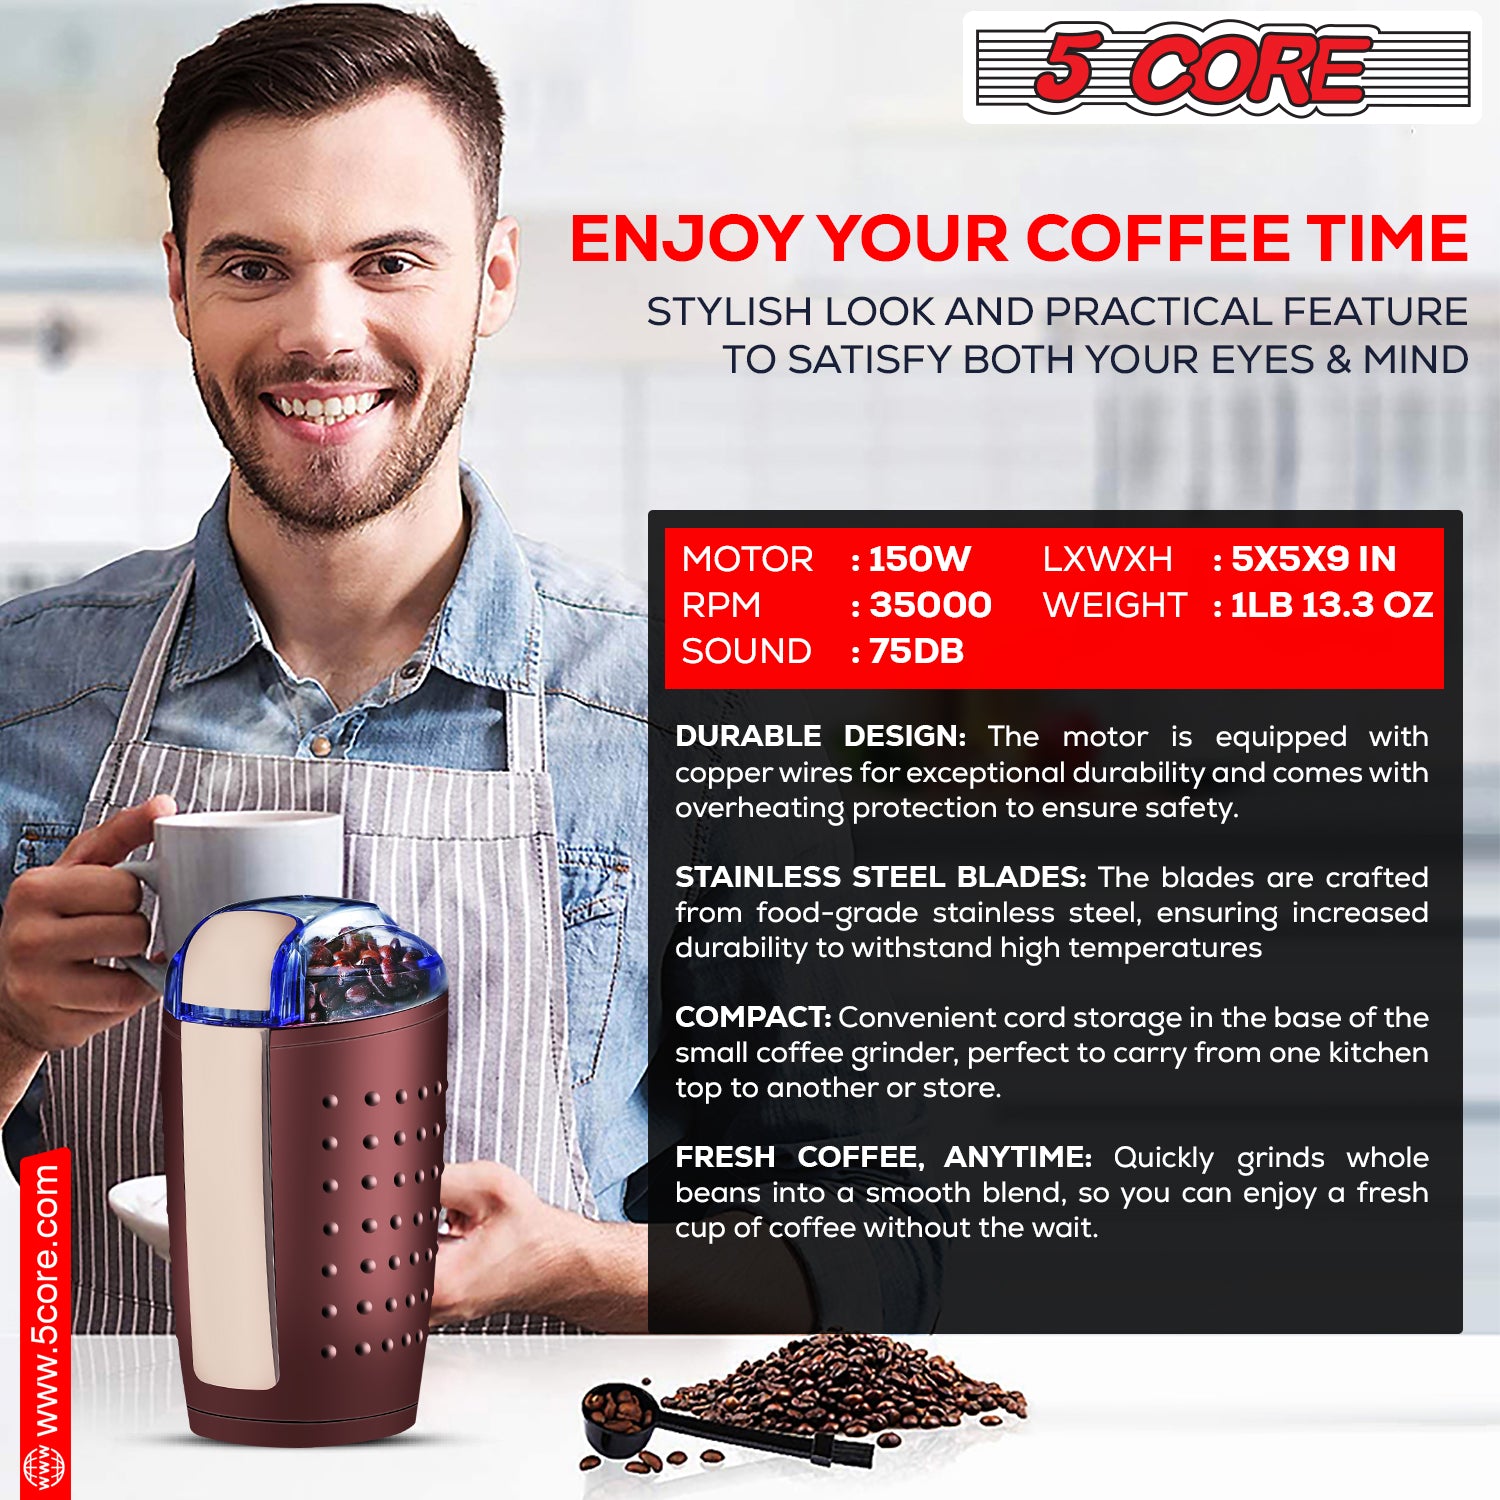 5 Core CG 01 BR Brown Coffee Grinder: Ideal for Everyday Use, 85g Capacity, 150W